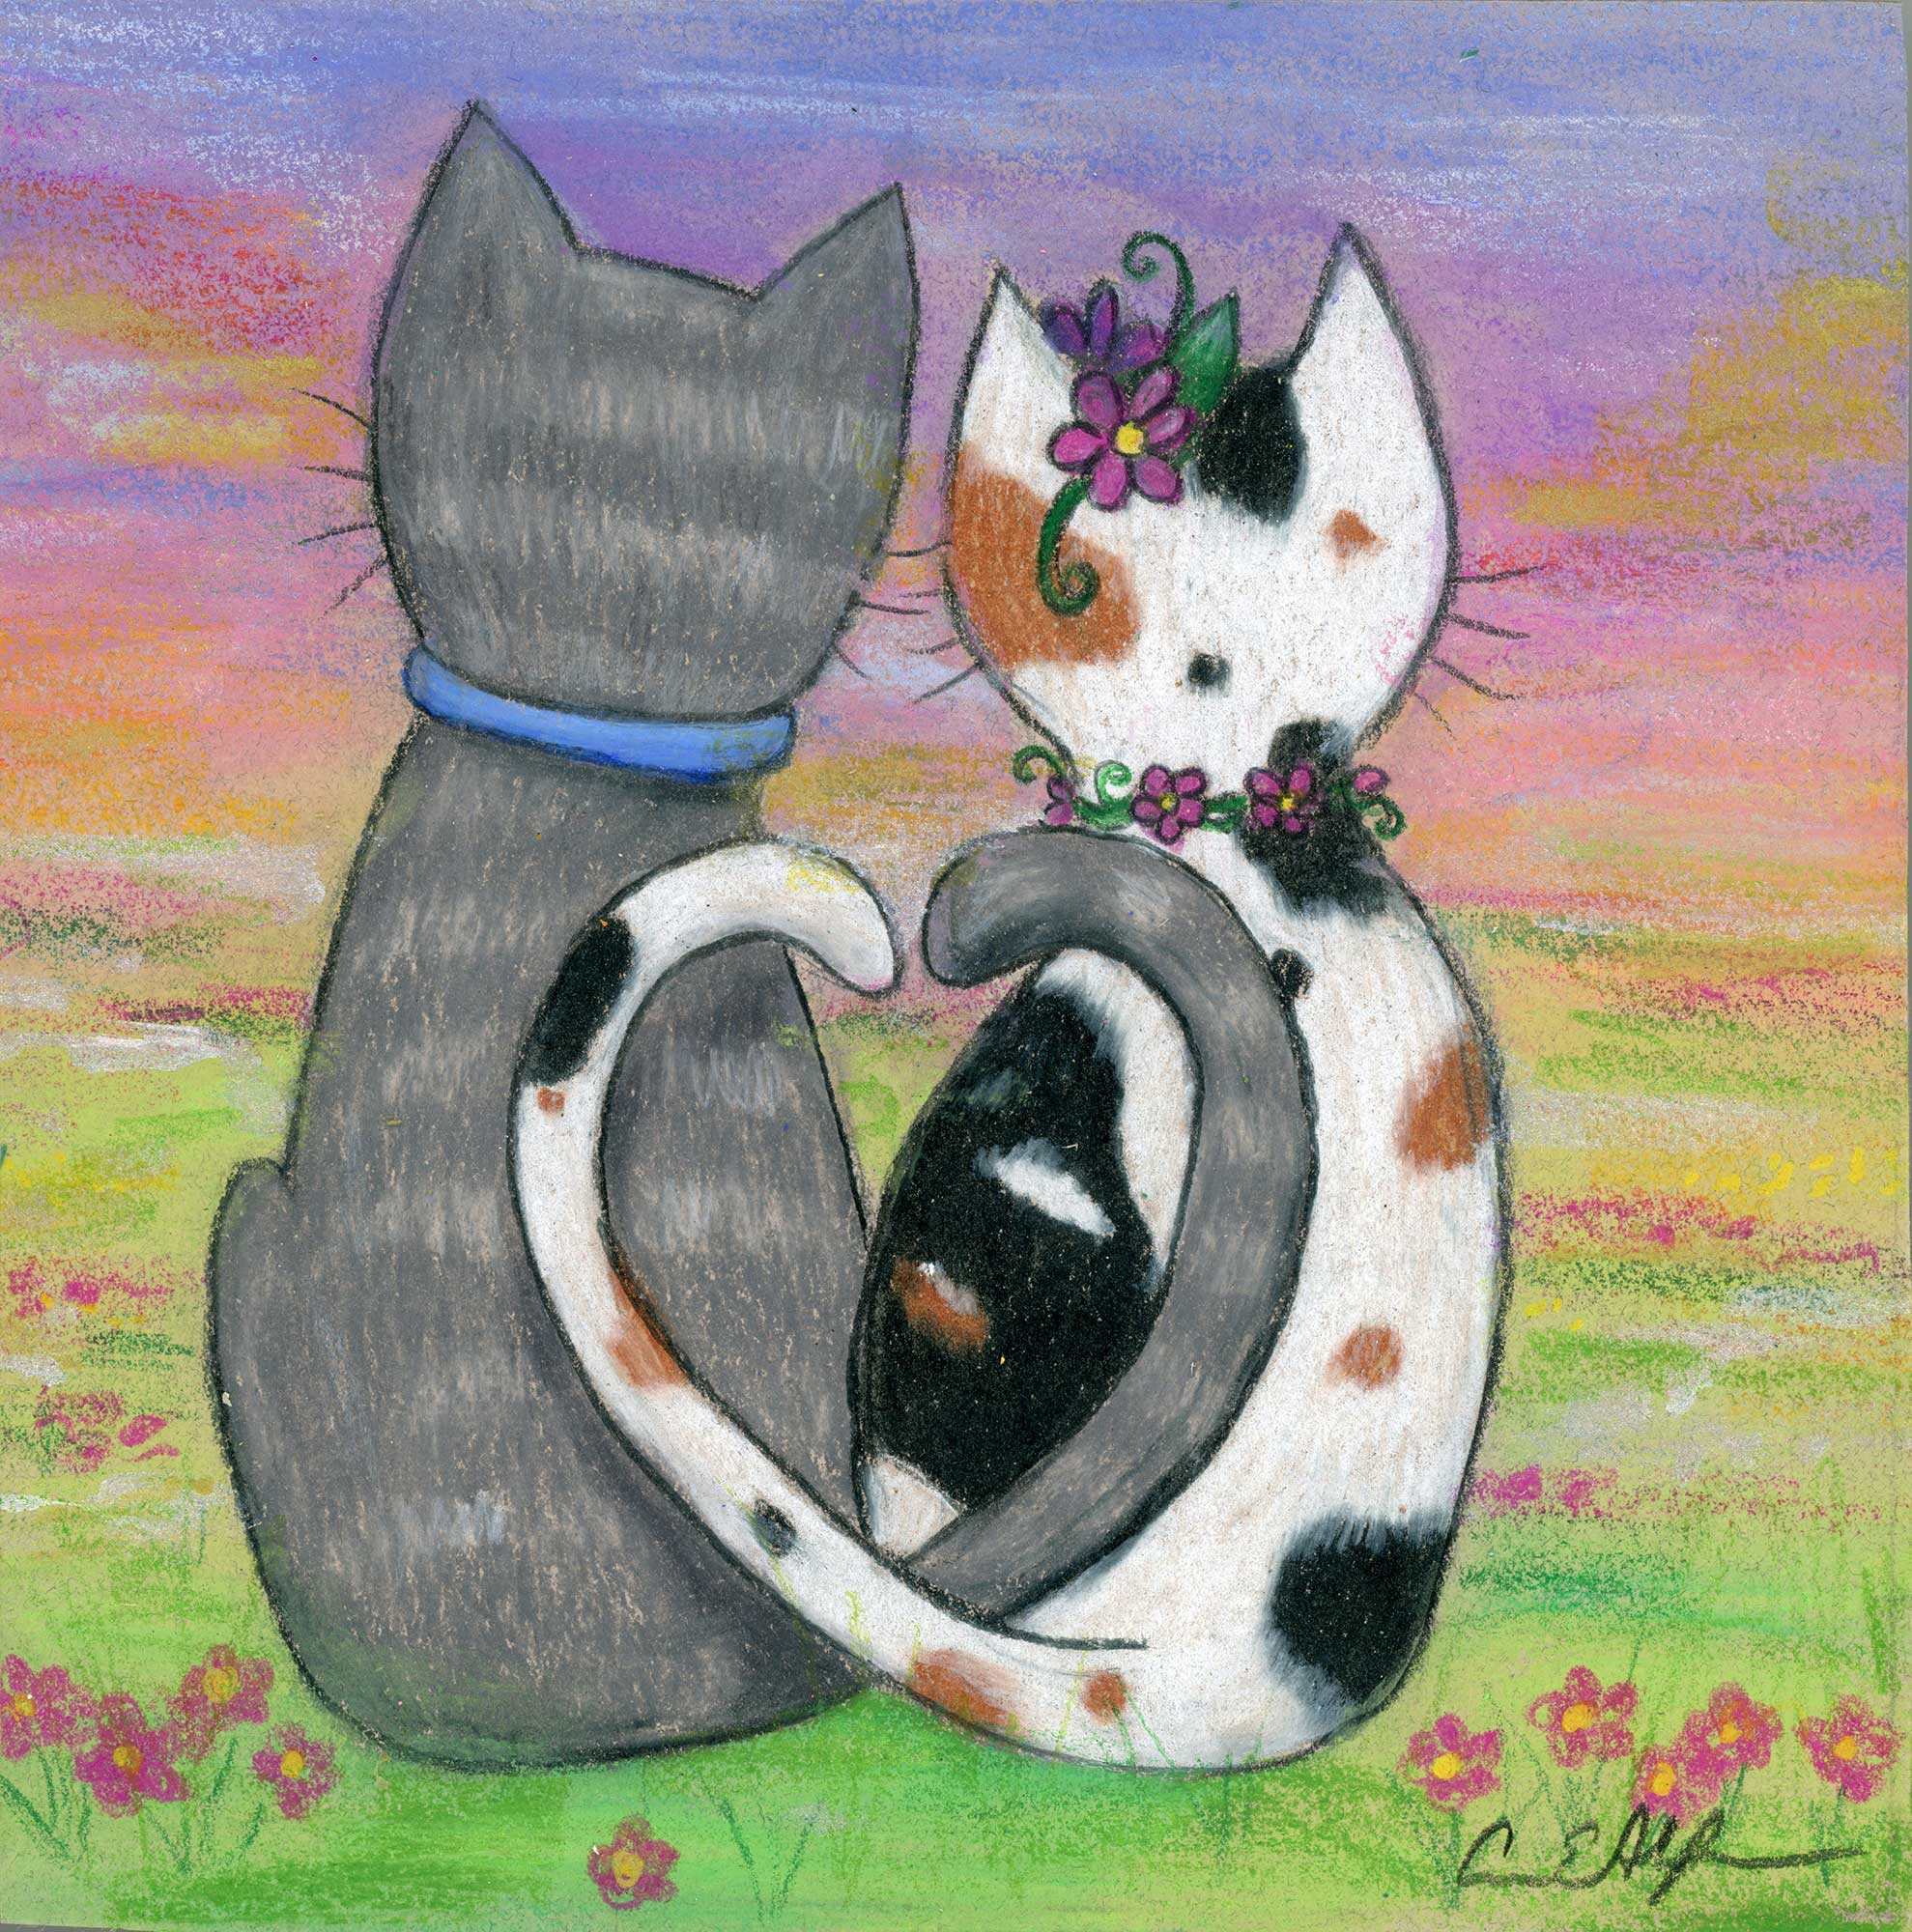 SOLD - "Heart Tails", 6" x 6", mixed media